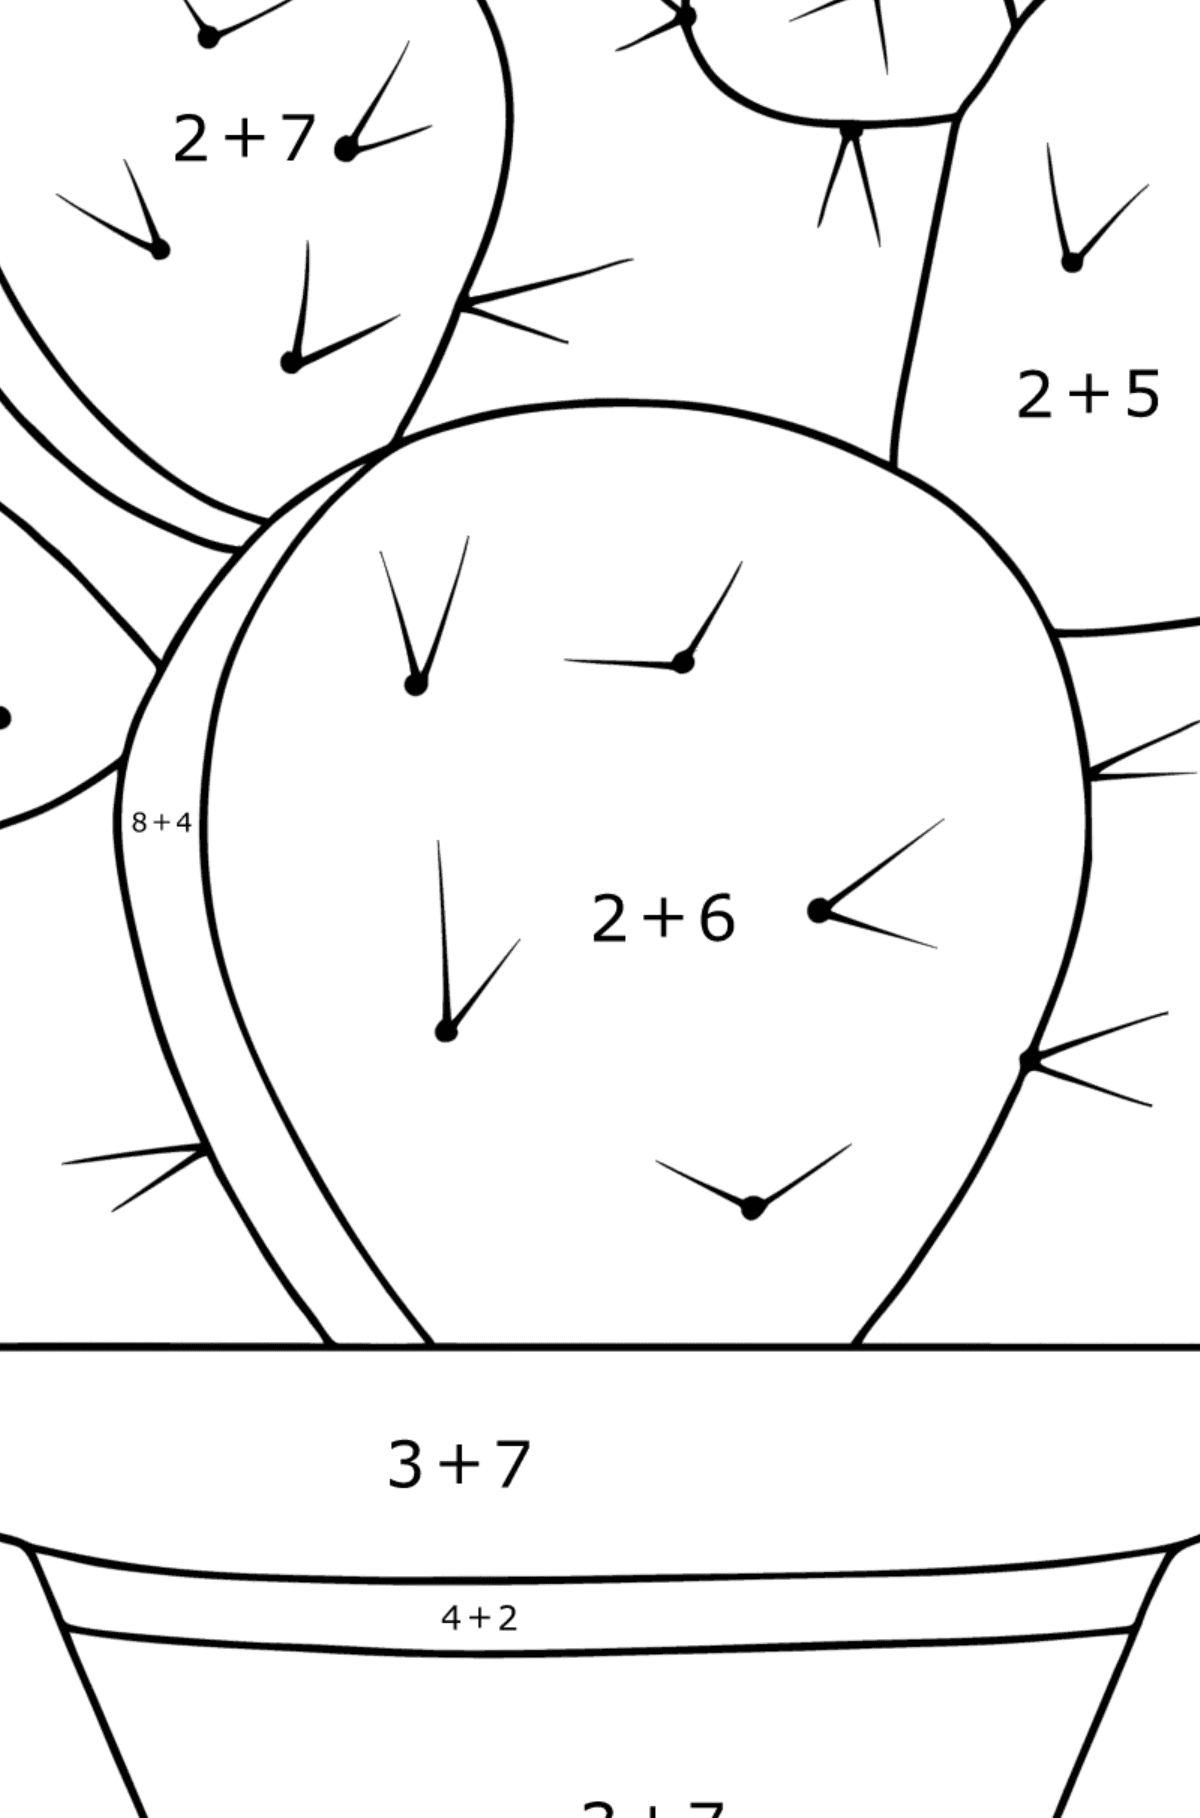 Prickly pear Cactus coloring page - Math Coloring - Addition for Kids